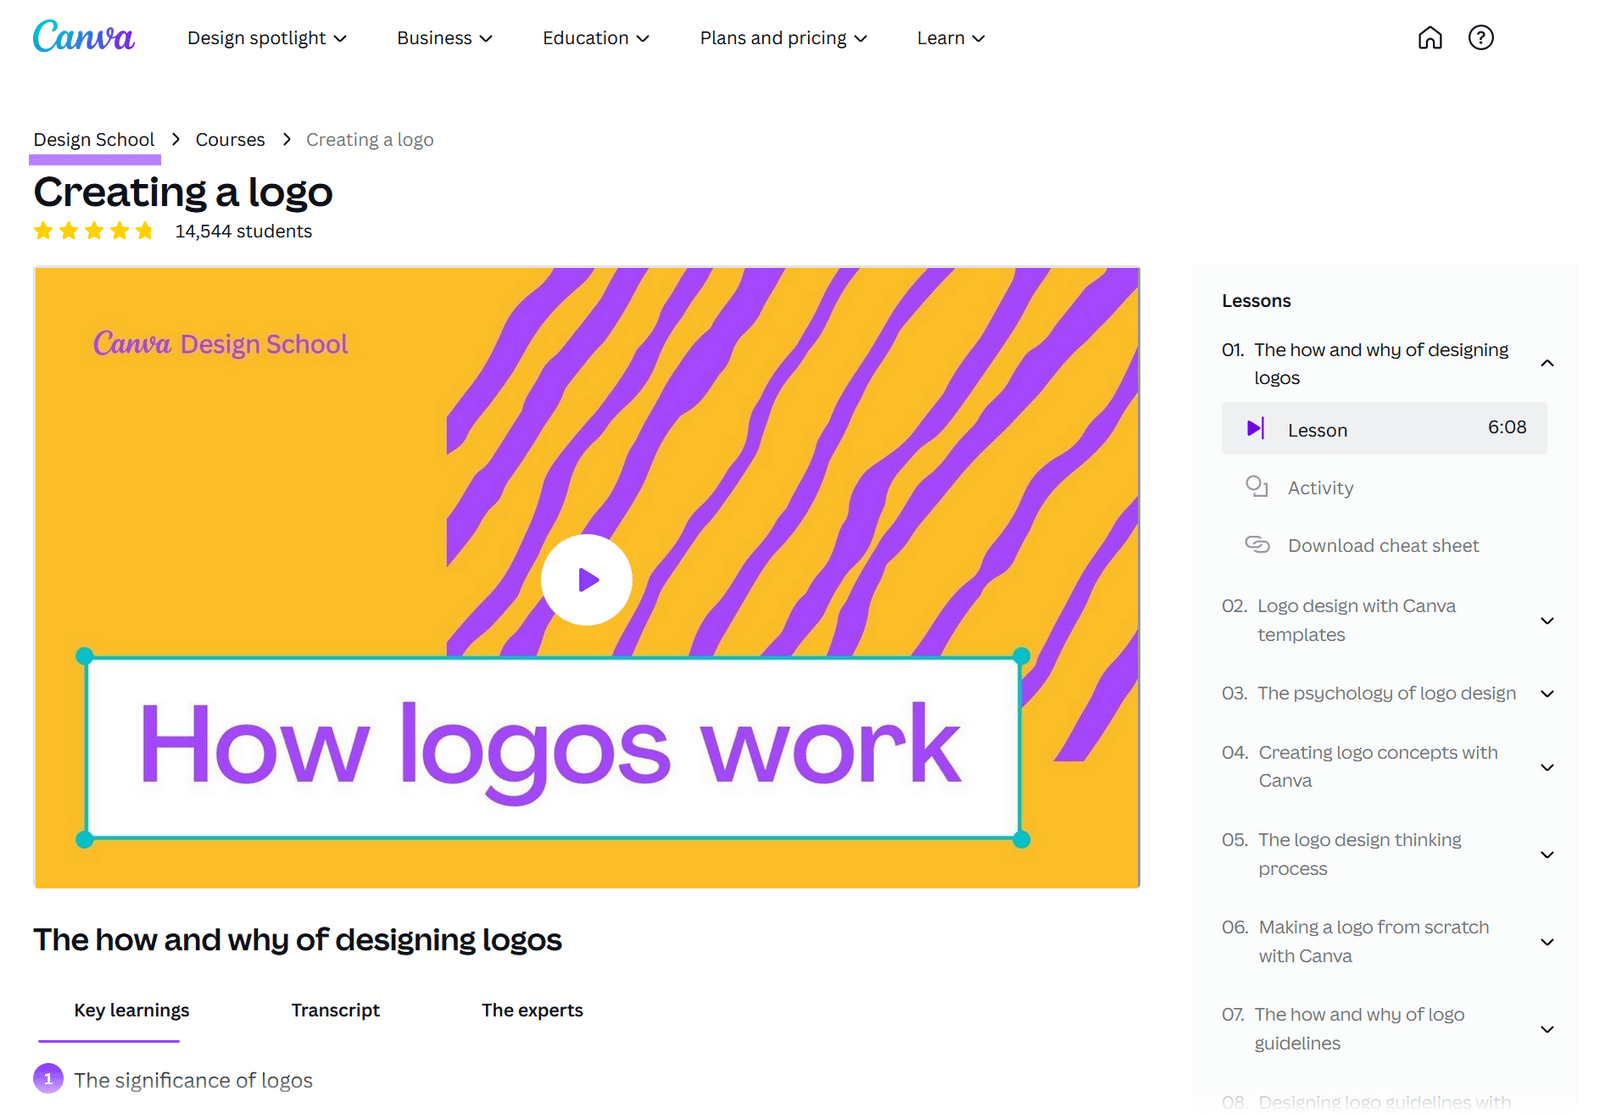 Canva's Design School page showing a B2B video content example of how to create a logo